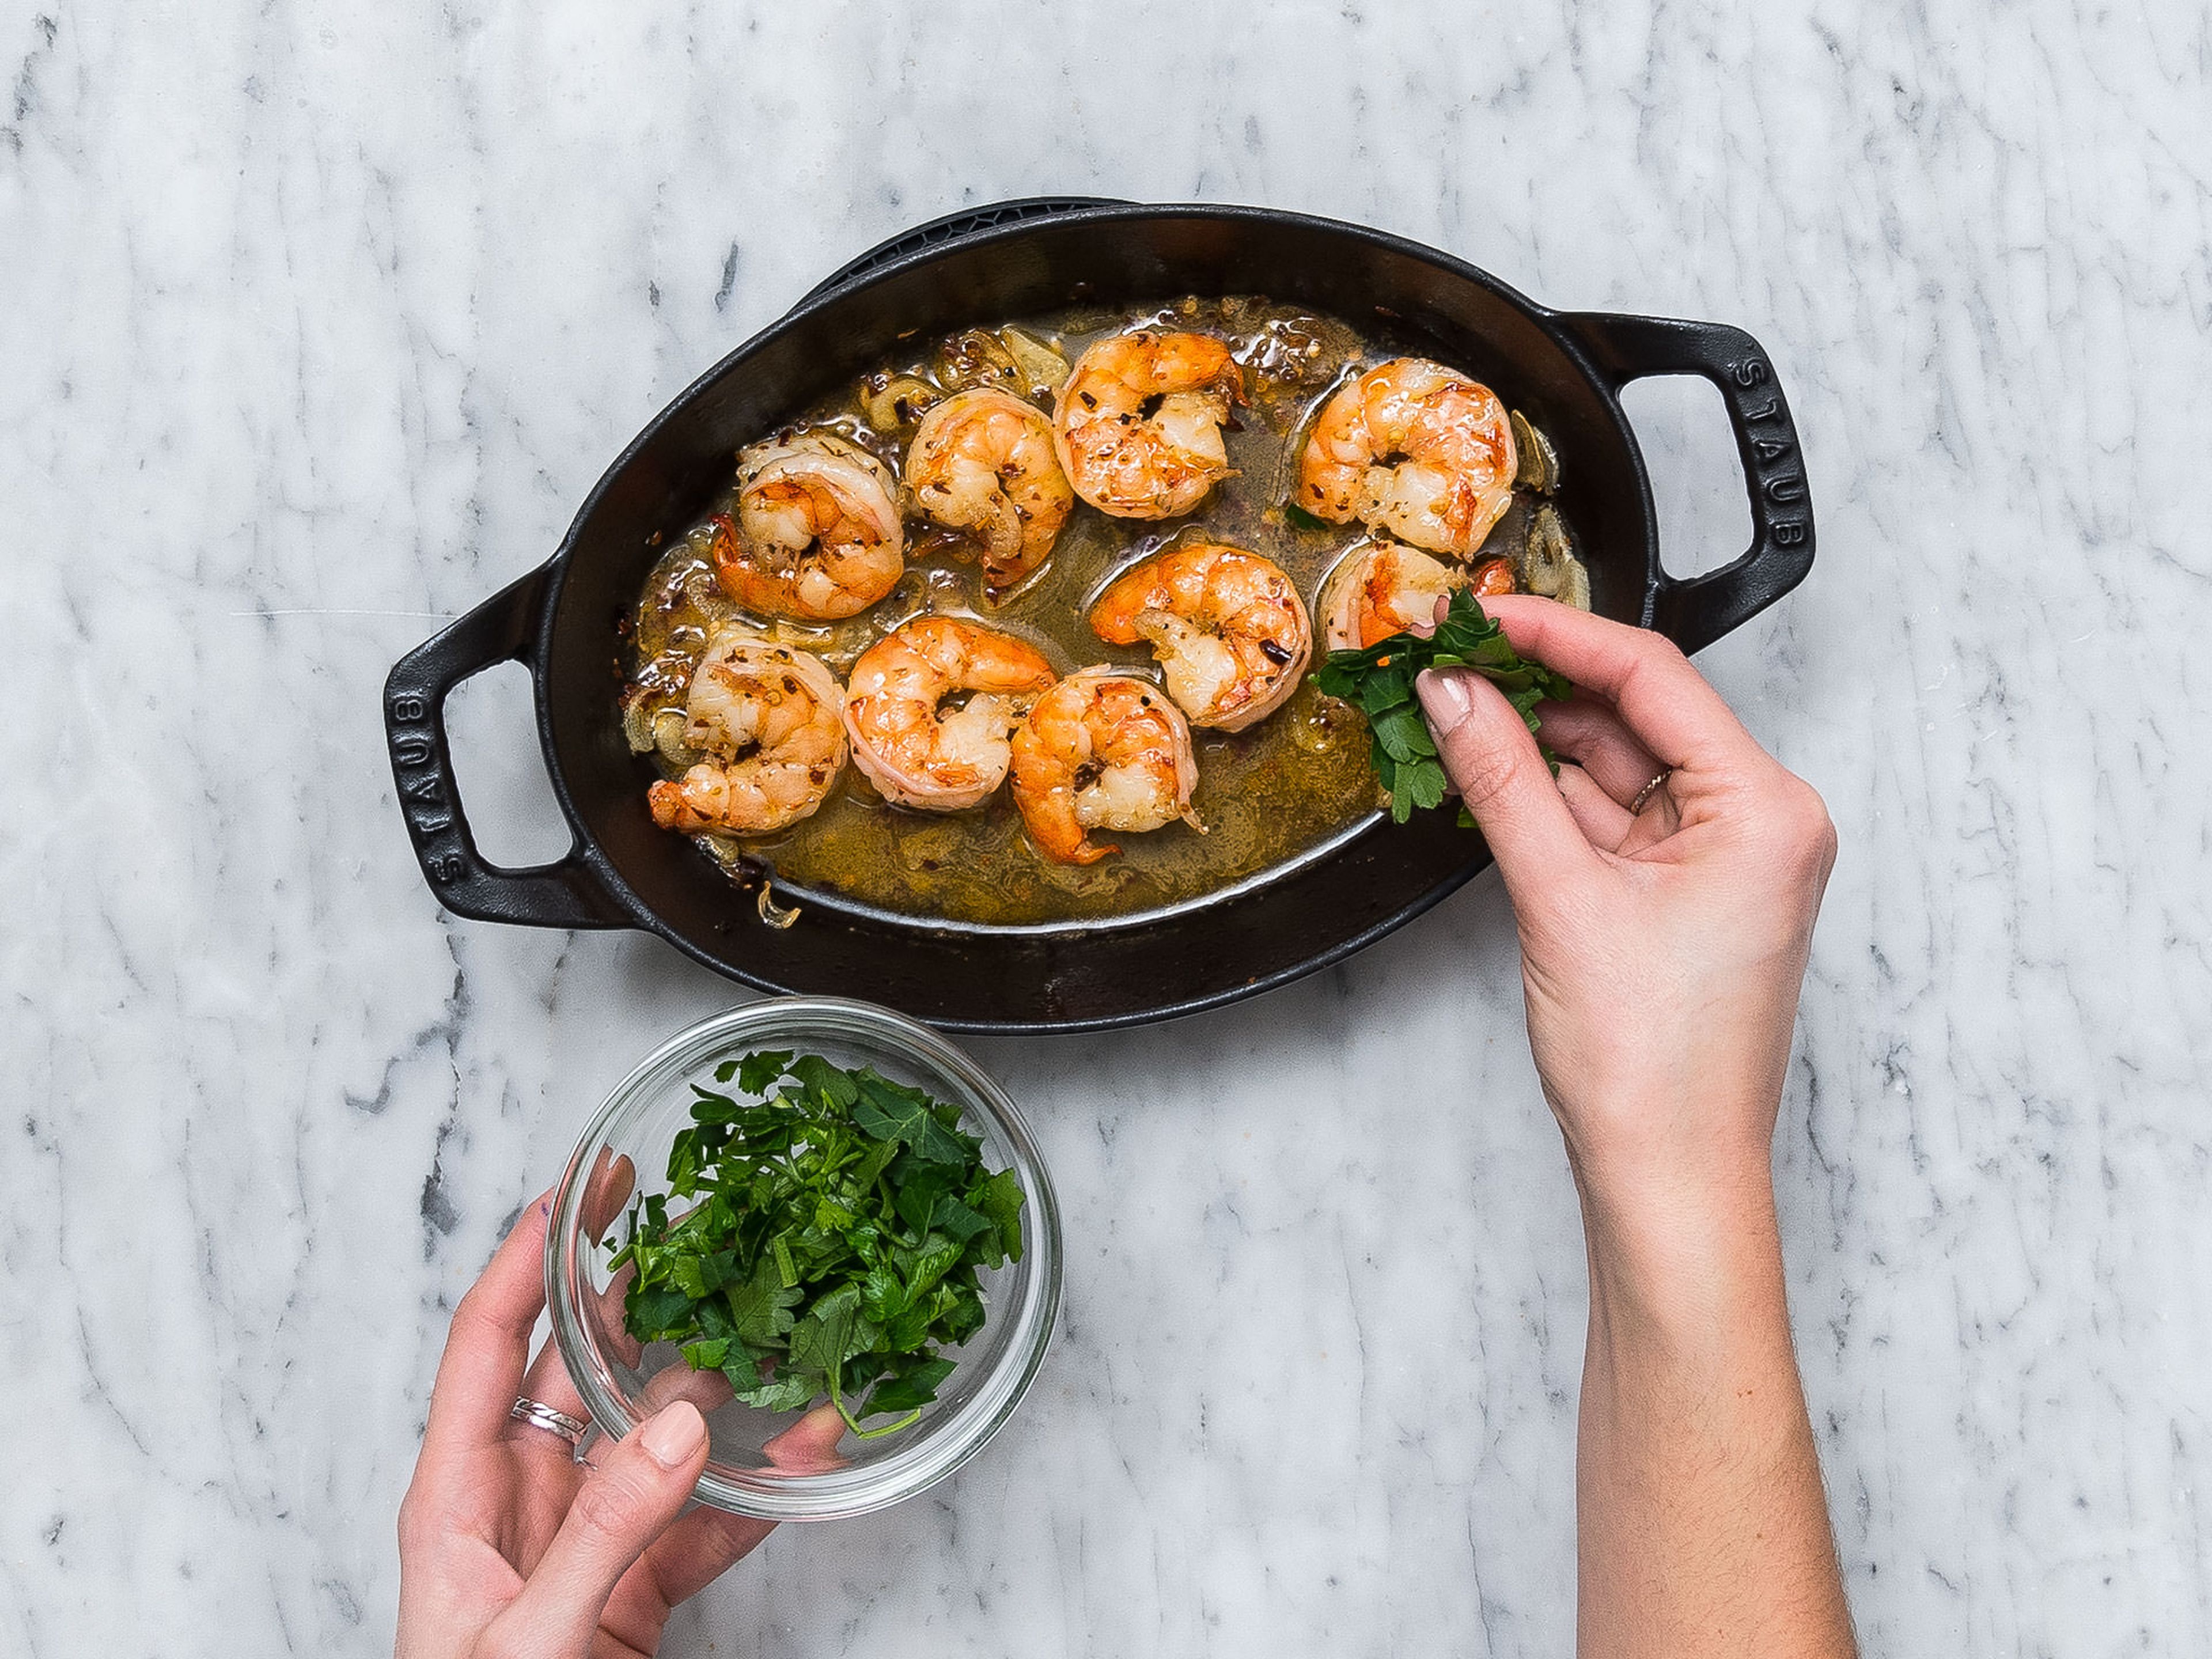 Add white wine to pan with shrimp and cook for approx. 1 – 2 min. more over medium heat. Remove from heat and sprinkle with chopped parsley and salt. Served with toasted baguette slices. Enjoy!